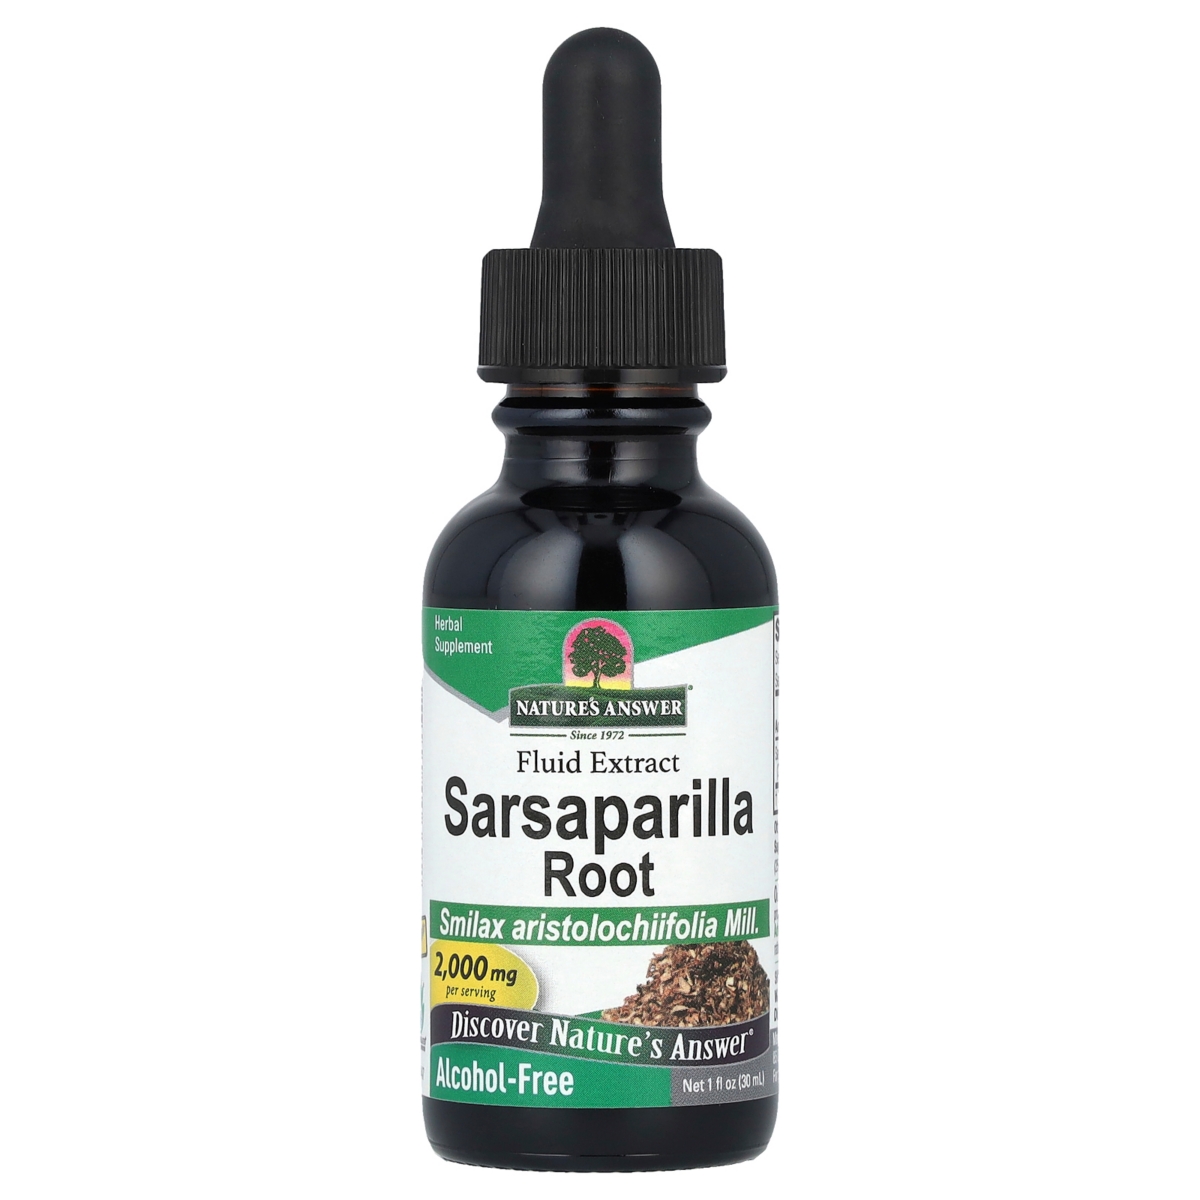 Sarsaparilla Root Fluid Extract Alcohol-Free 2 000 mg - 1 fl oz (30 ml) - Assorted Pre-Pack